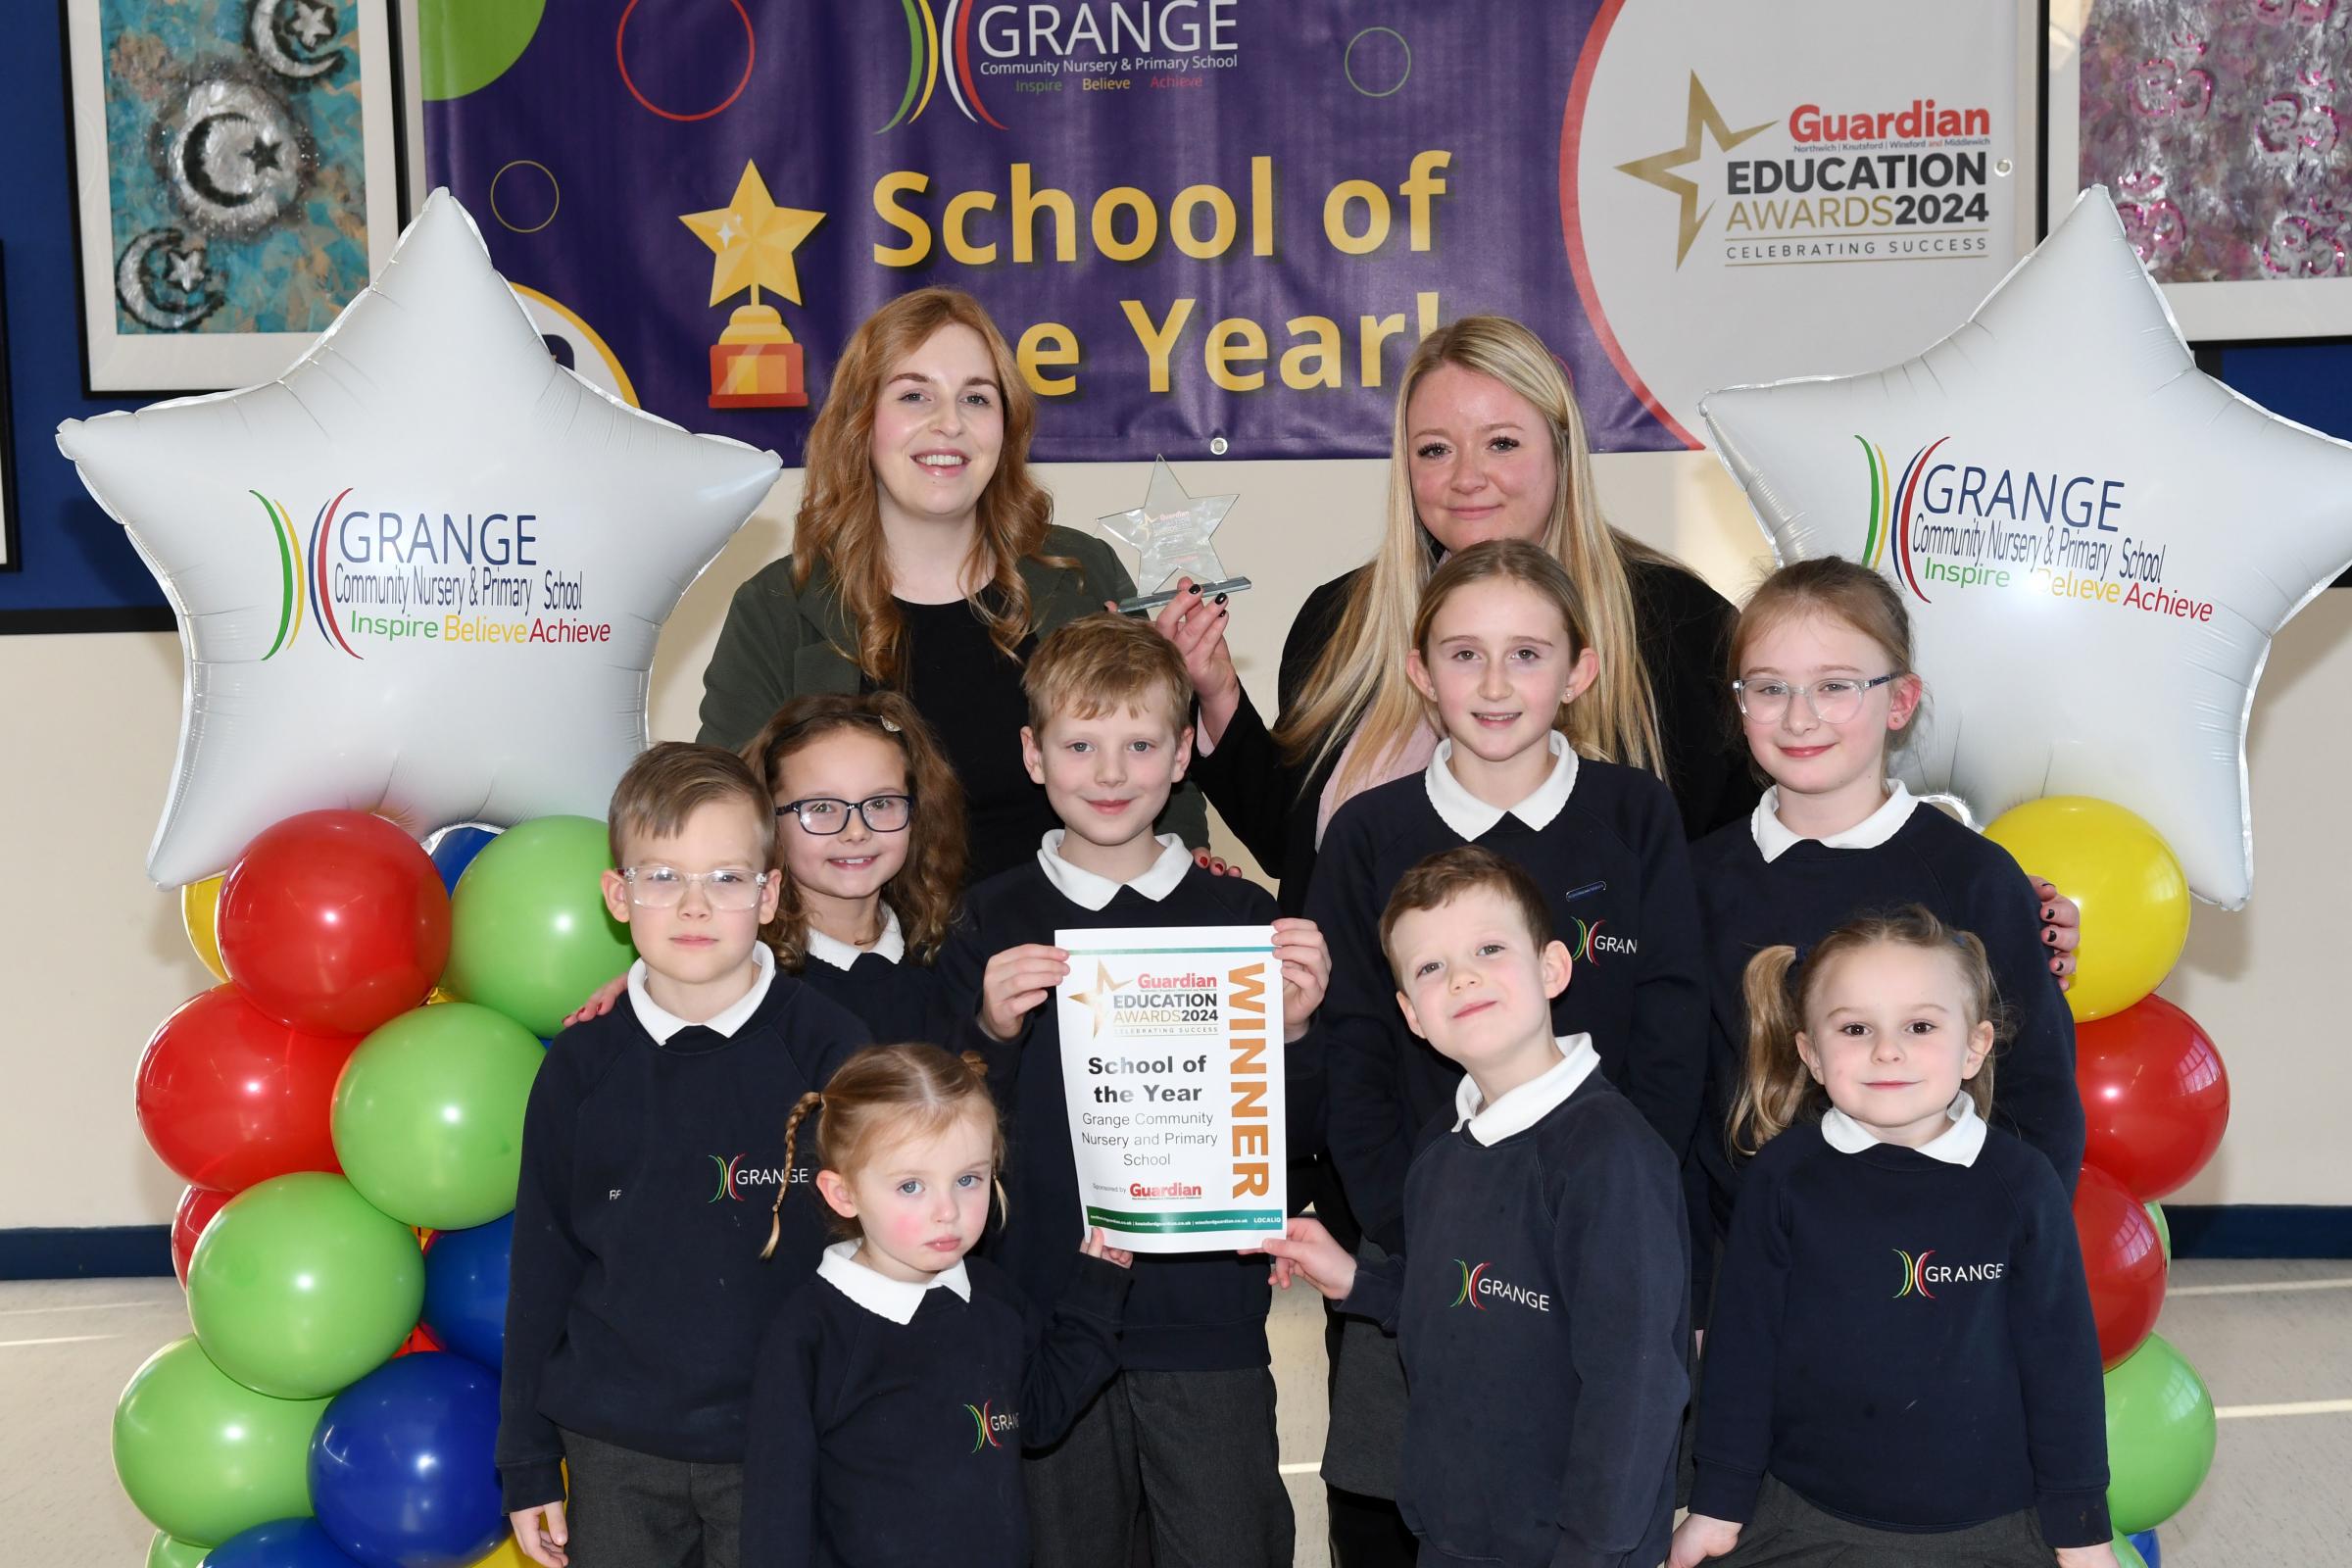 Headteacher Sara Albiston and assistant headteacher Harriet McGilloway celebrate winning School of the Year with pupils at Grange Community Nursery and Primary School